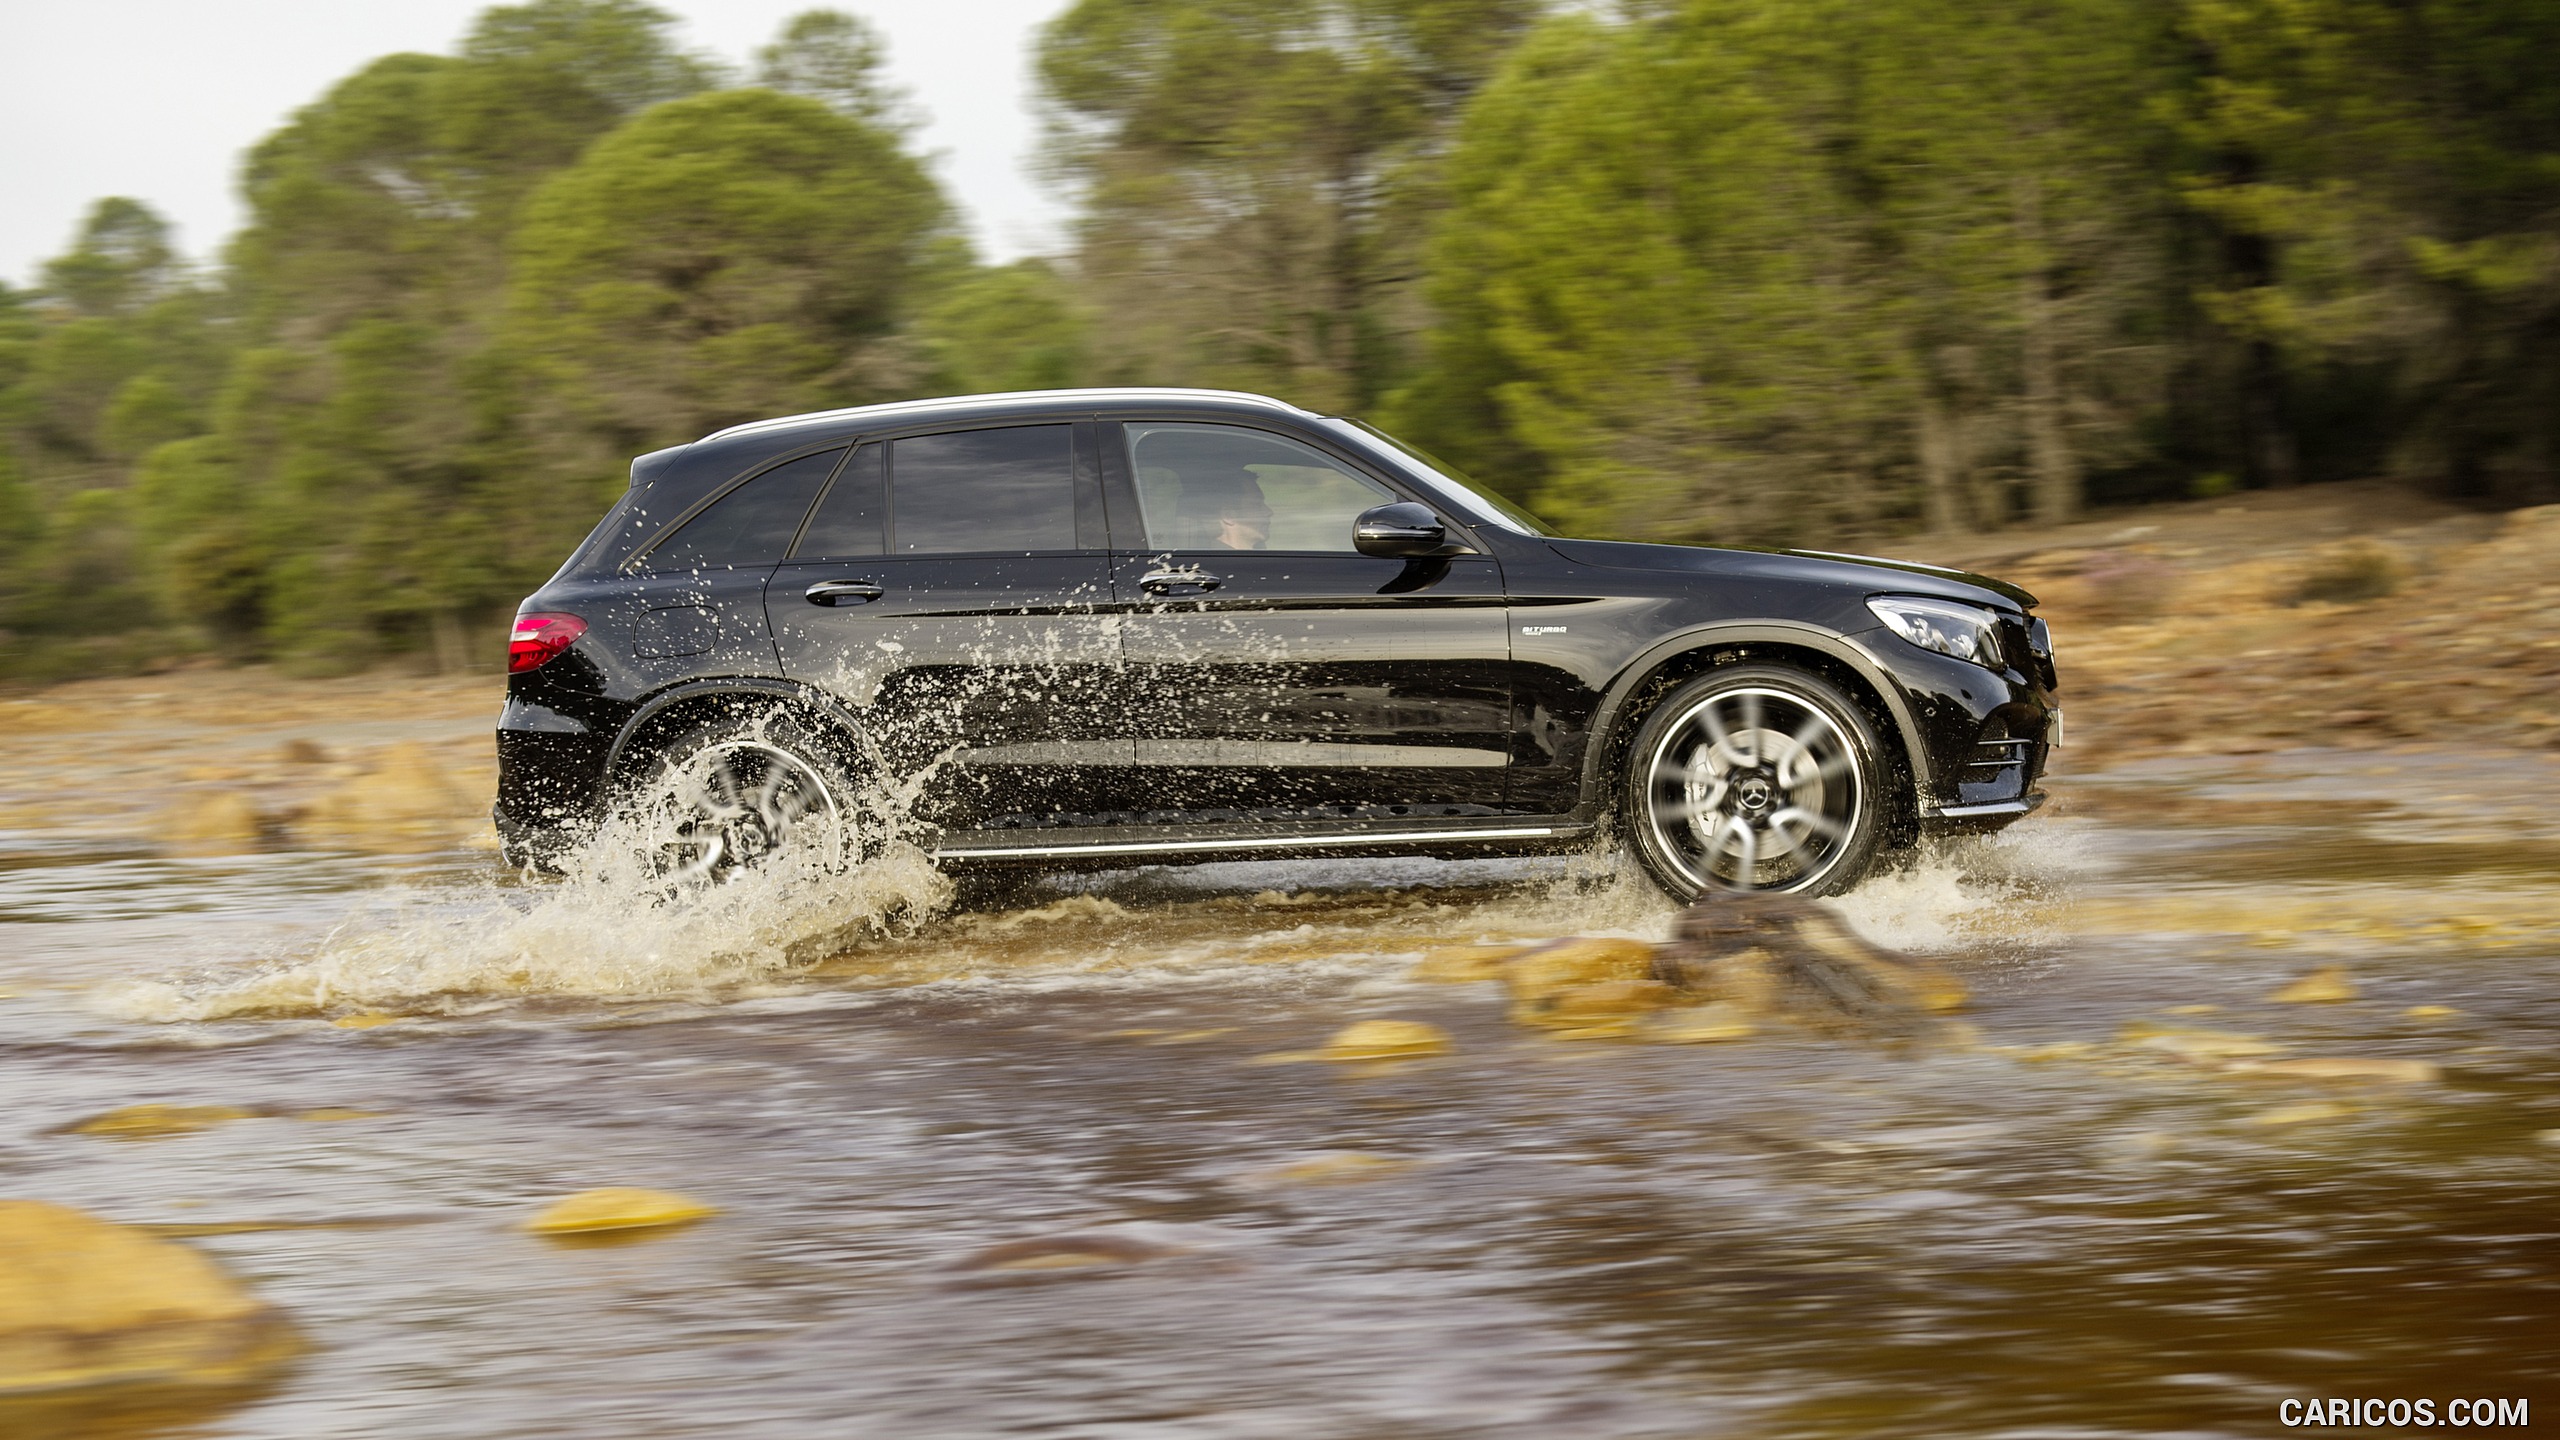 2017 Mercedes-AMG GLC 43 4MATIC (Chassis: X253, Color: Obsidian Black) - Off-Road, #20 of 108